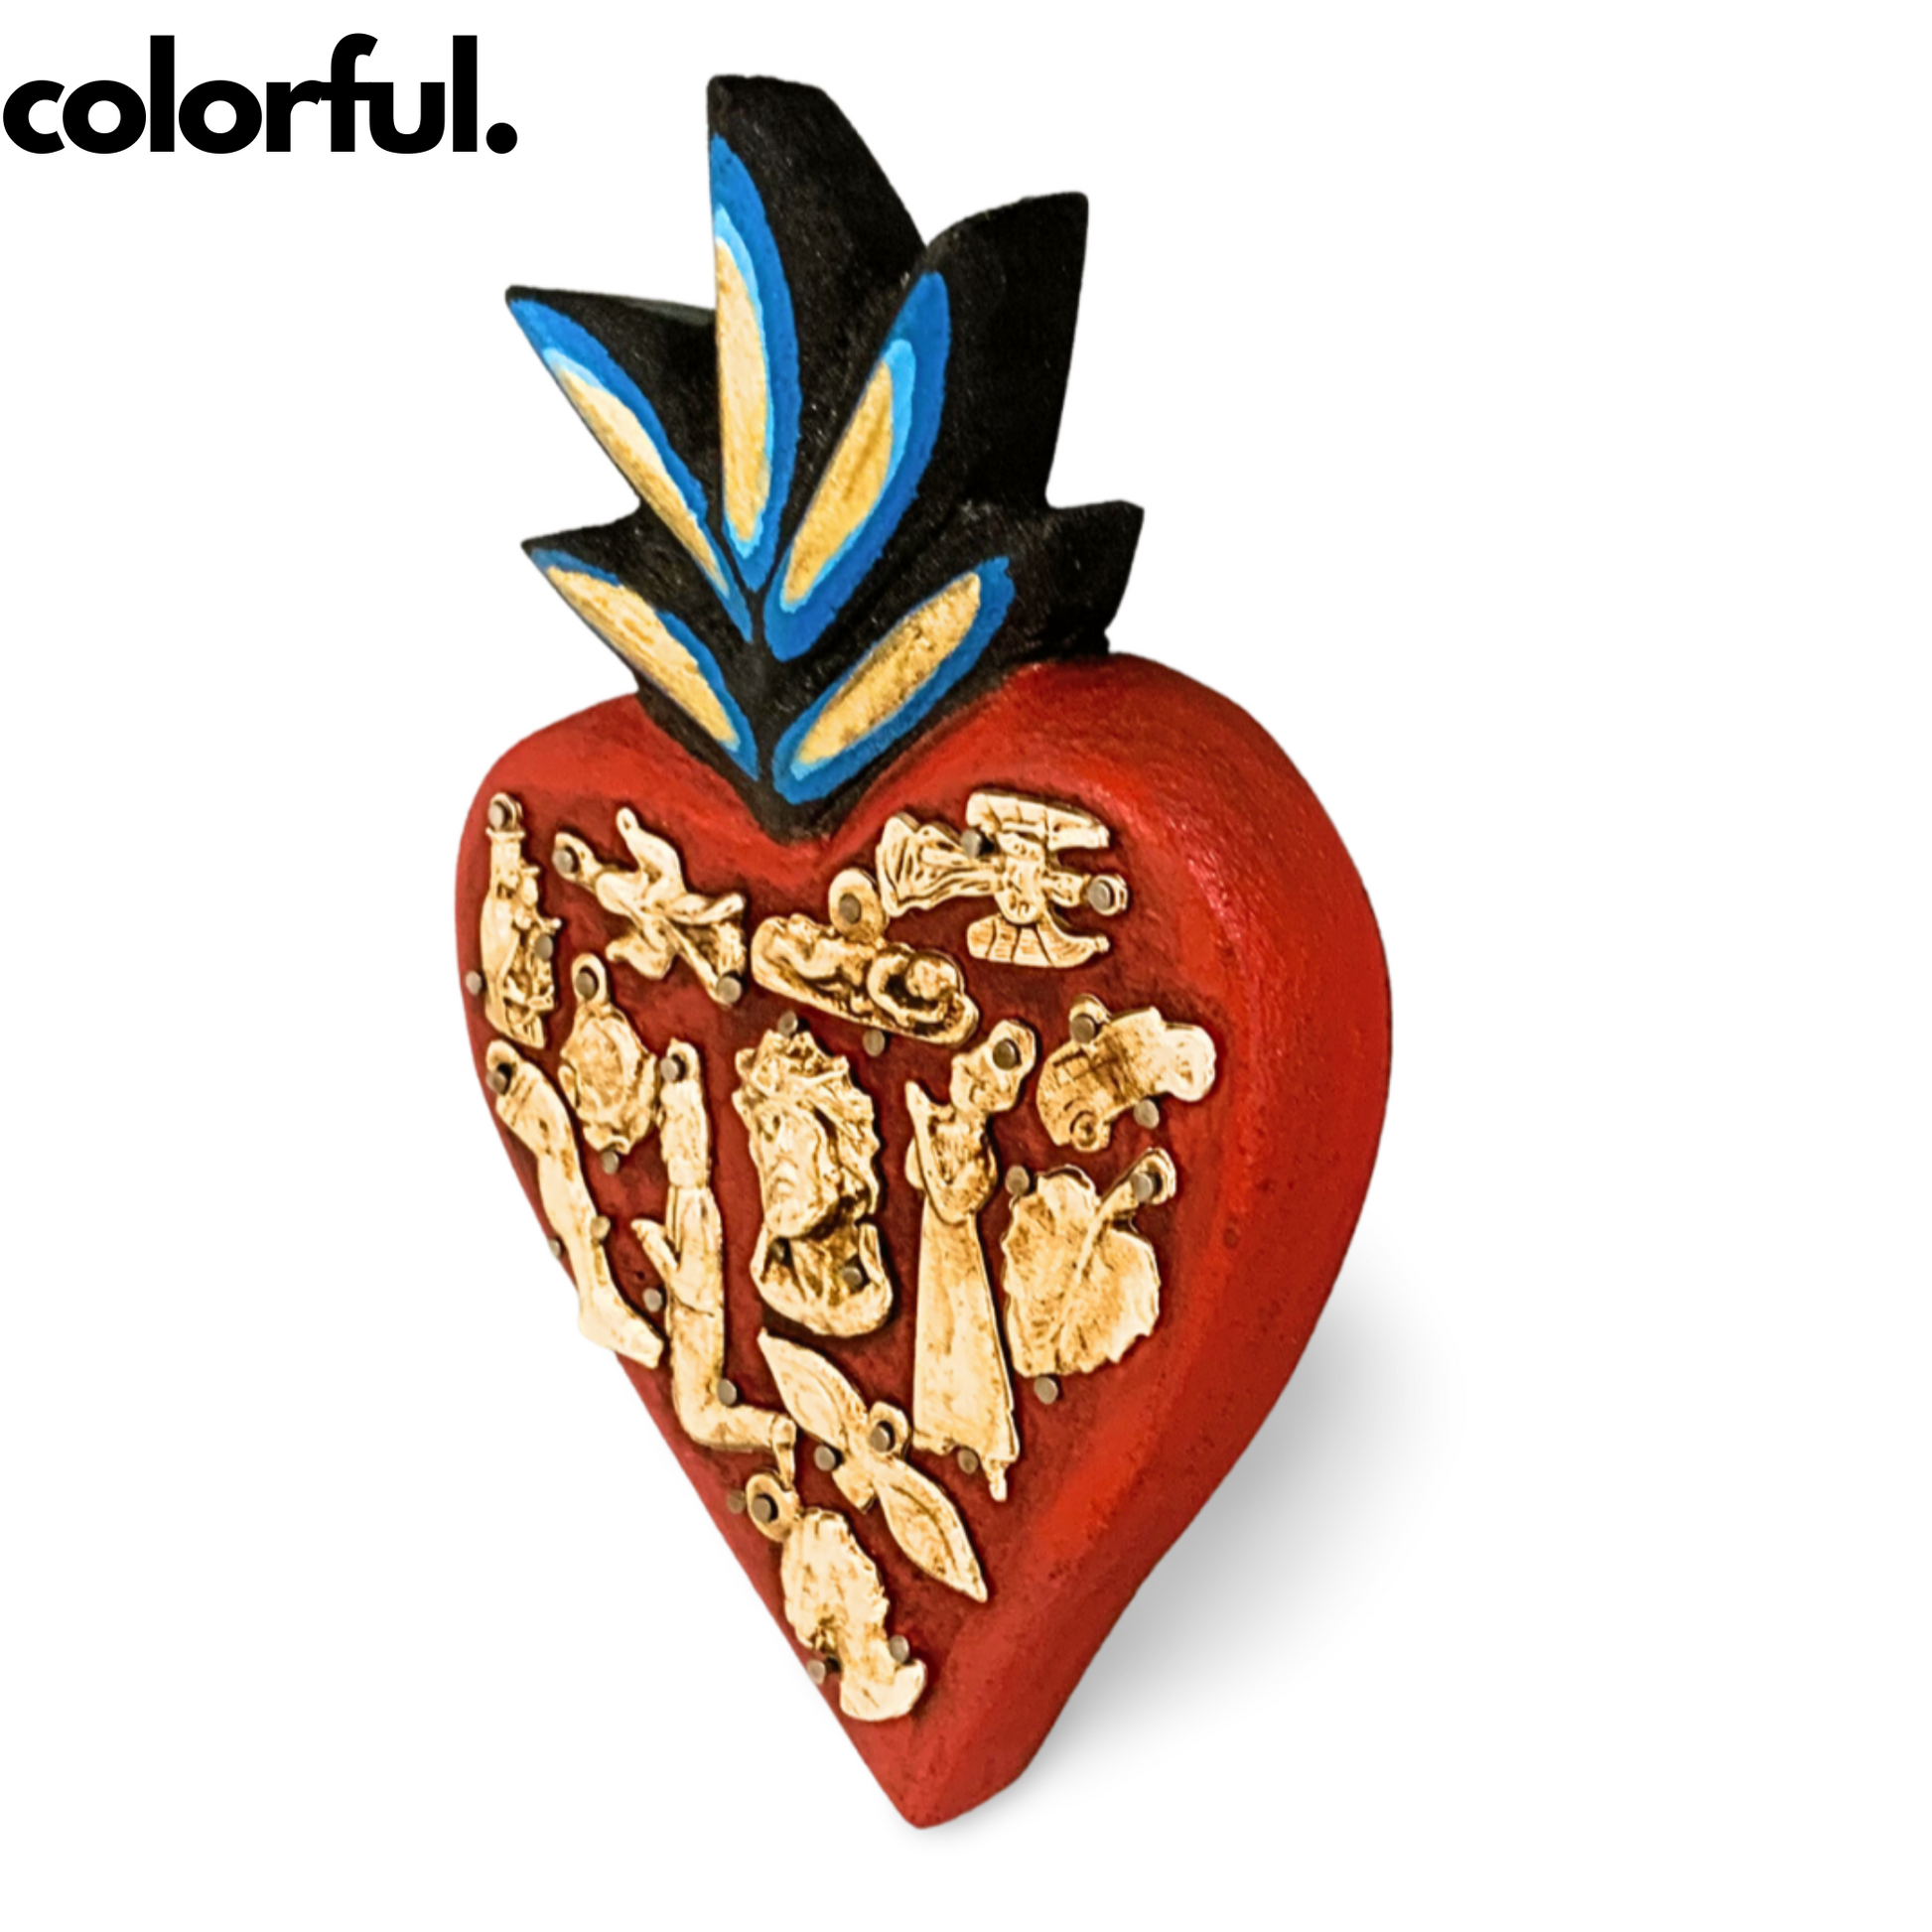 colorful Ex Voto Wooden Sacred Heart with Milagros, handcrafted and hand-painted by Mexican artisans, brightens up any room with its vibrant colors.